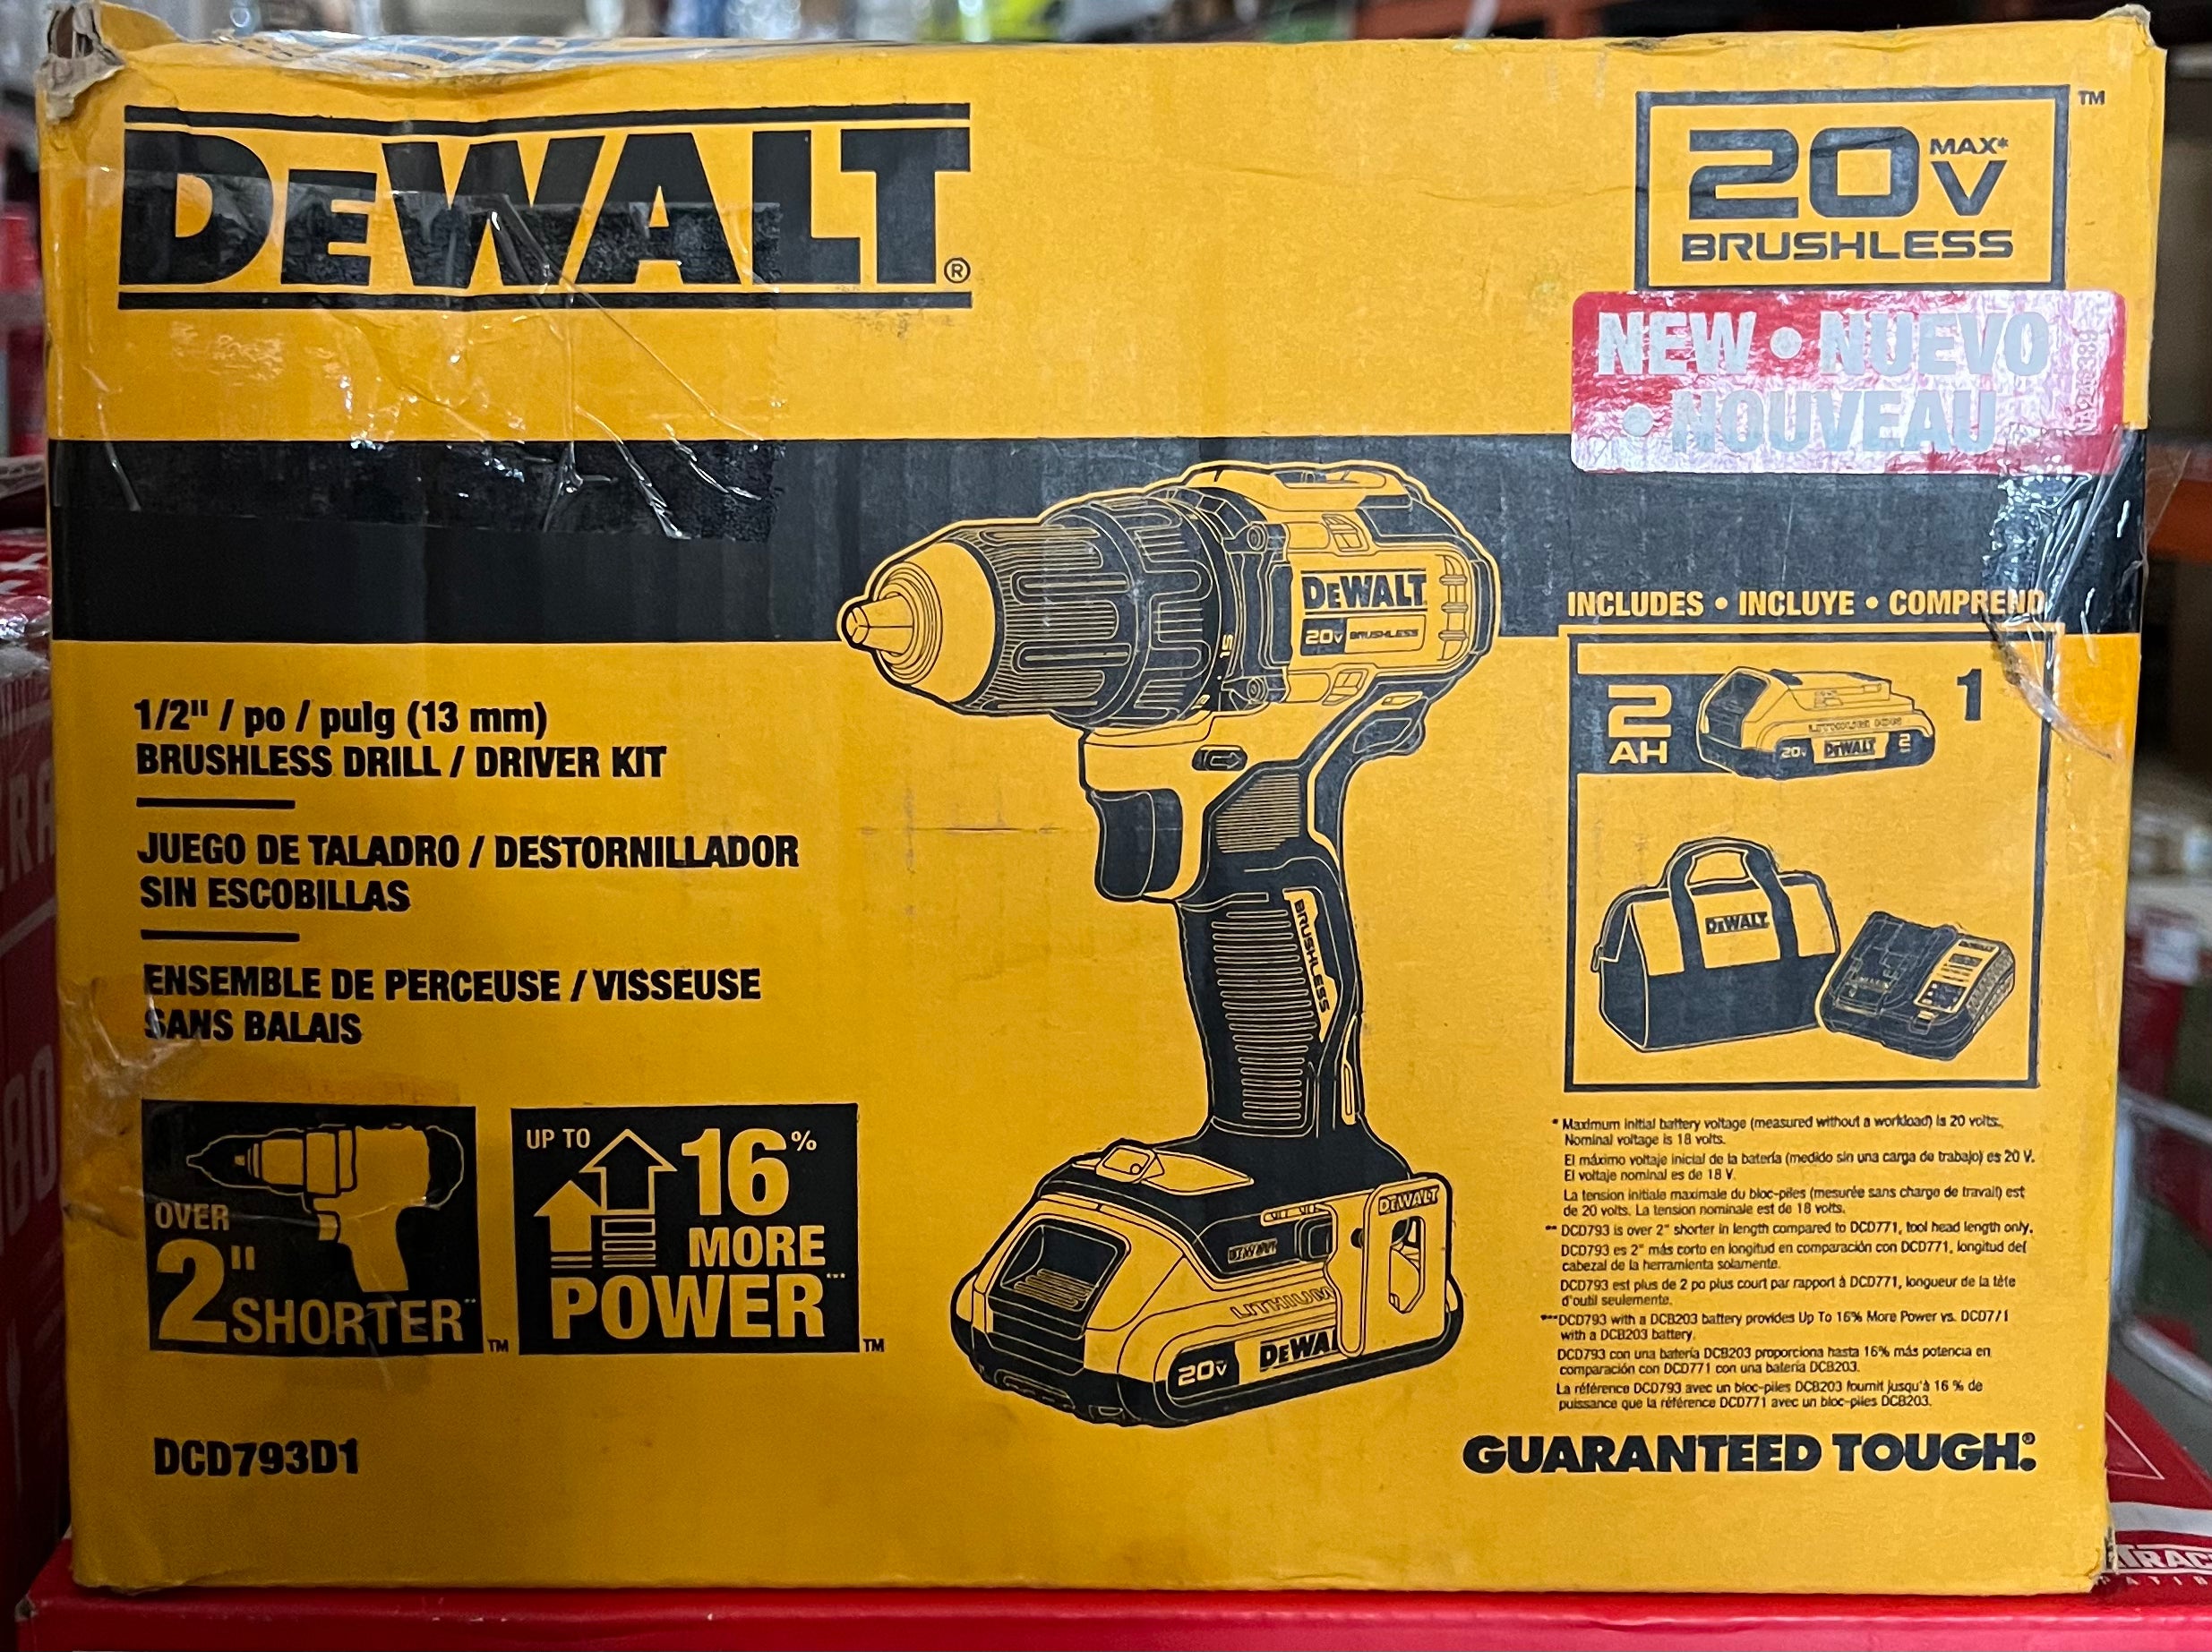 DEWALT 20-volt Max Brushless Drill (1-Battery, Charger and Soft